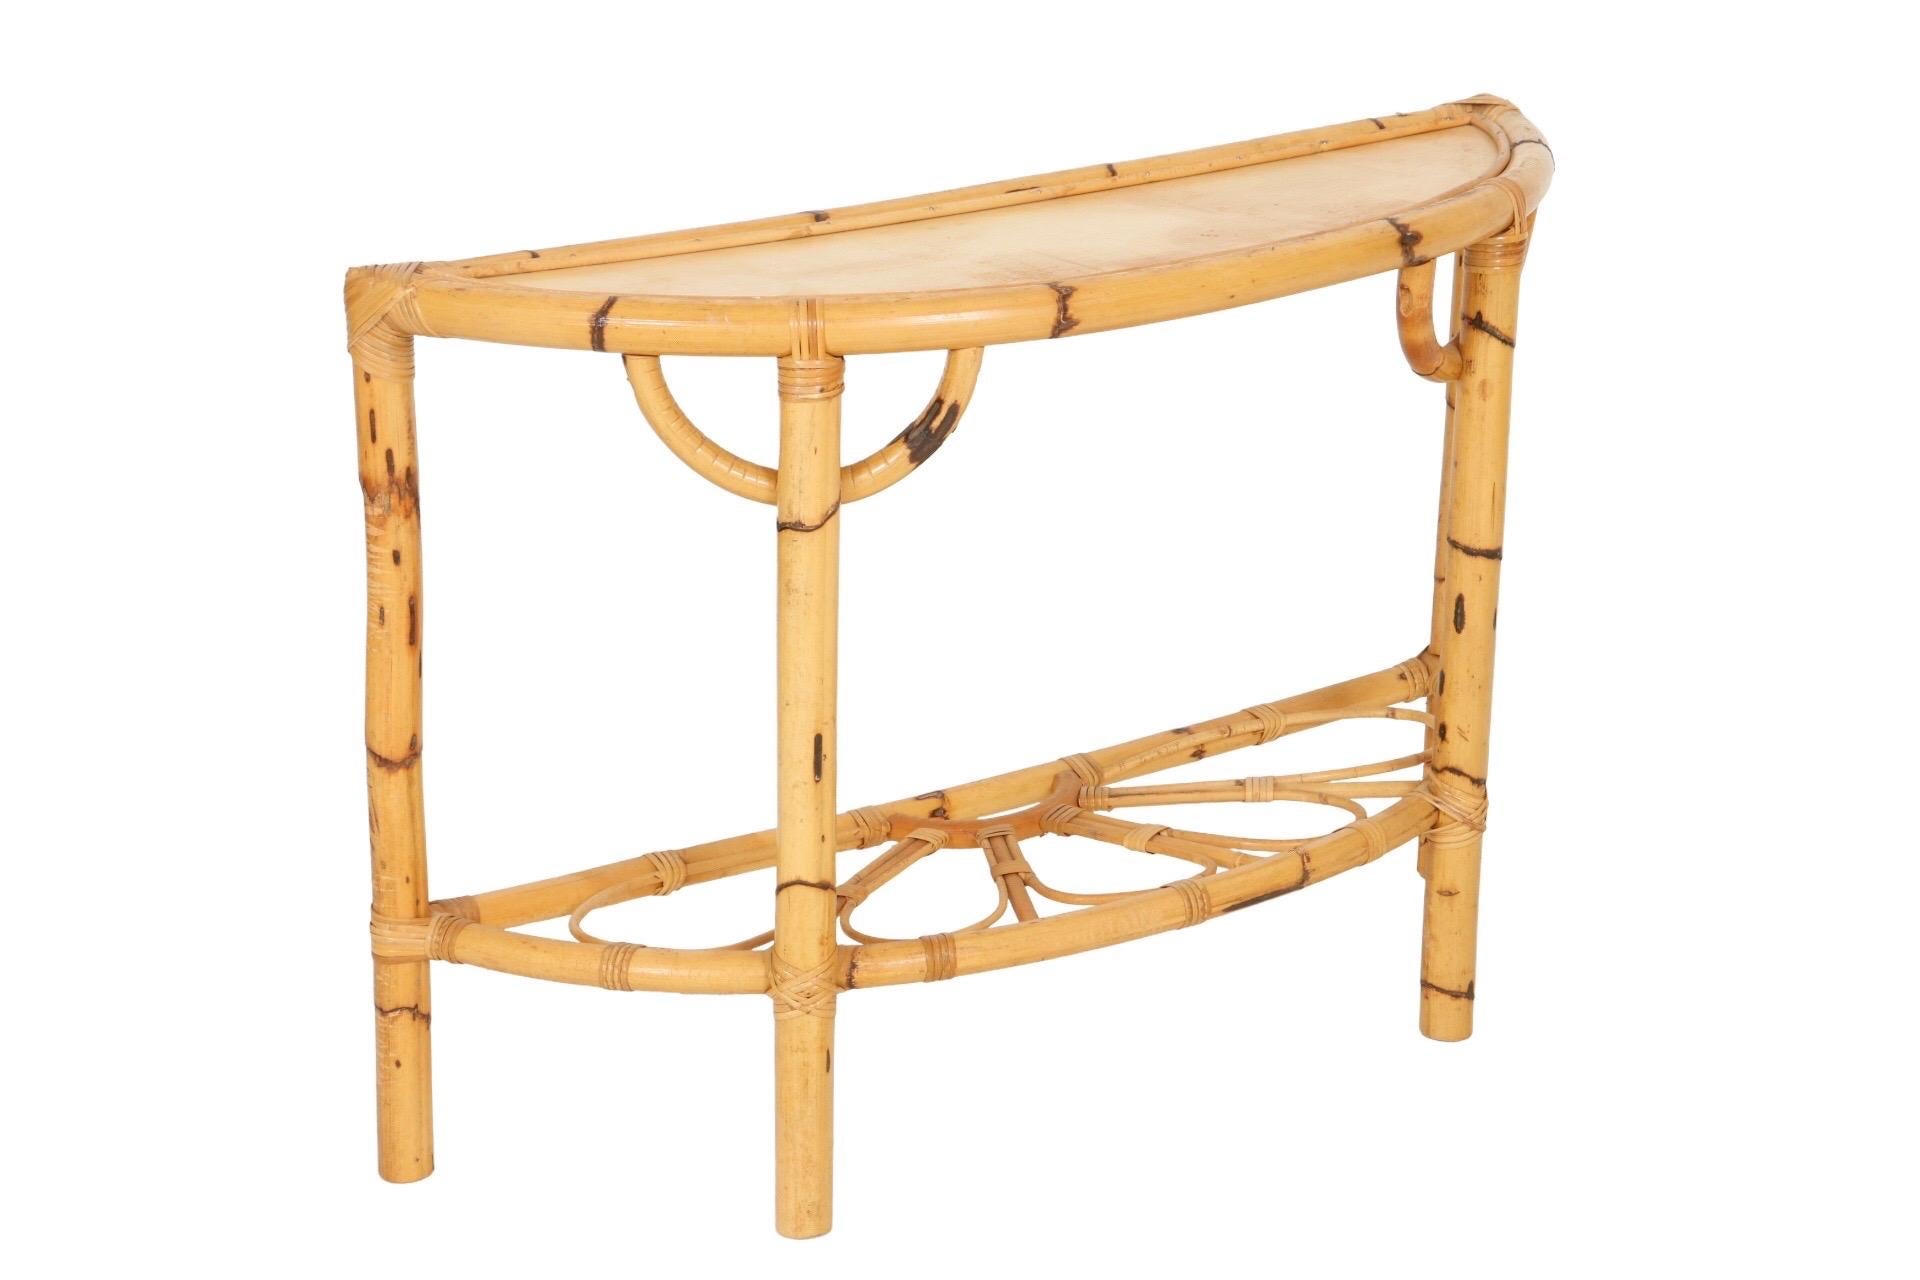 A bamboo demilune hall table. Thick bamboo pieces form the frame with bentwood bamboo C curve supports at the top of the front legs. Below, bentwood pencil bamboo forms a decorative daisy stretcher. Joins are secured with fine rattan wrapping.